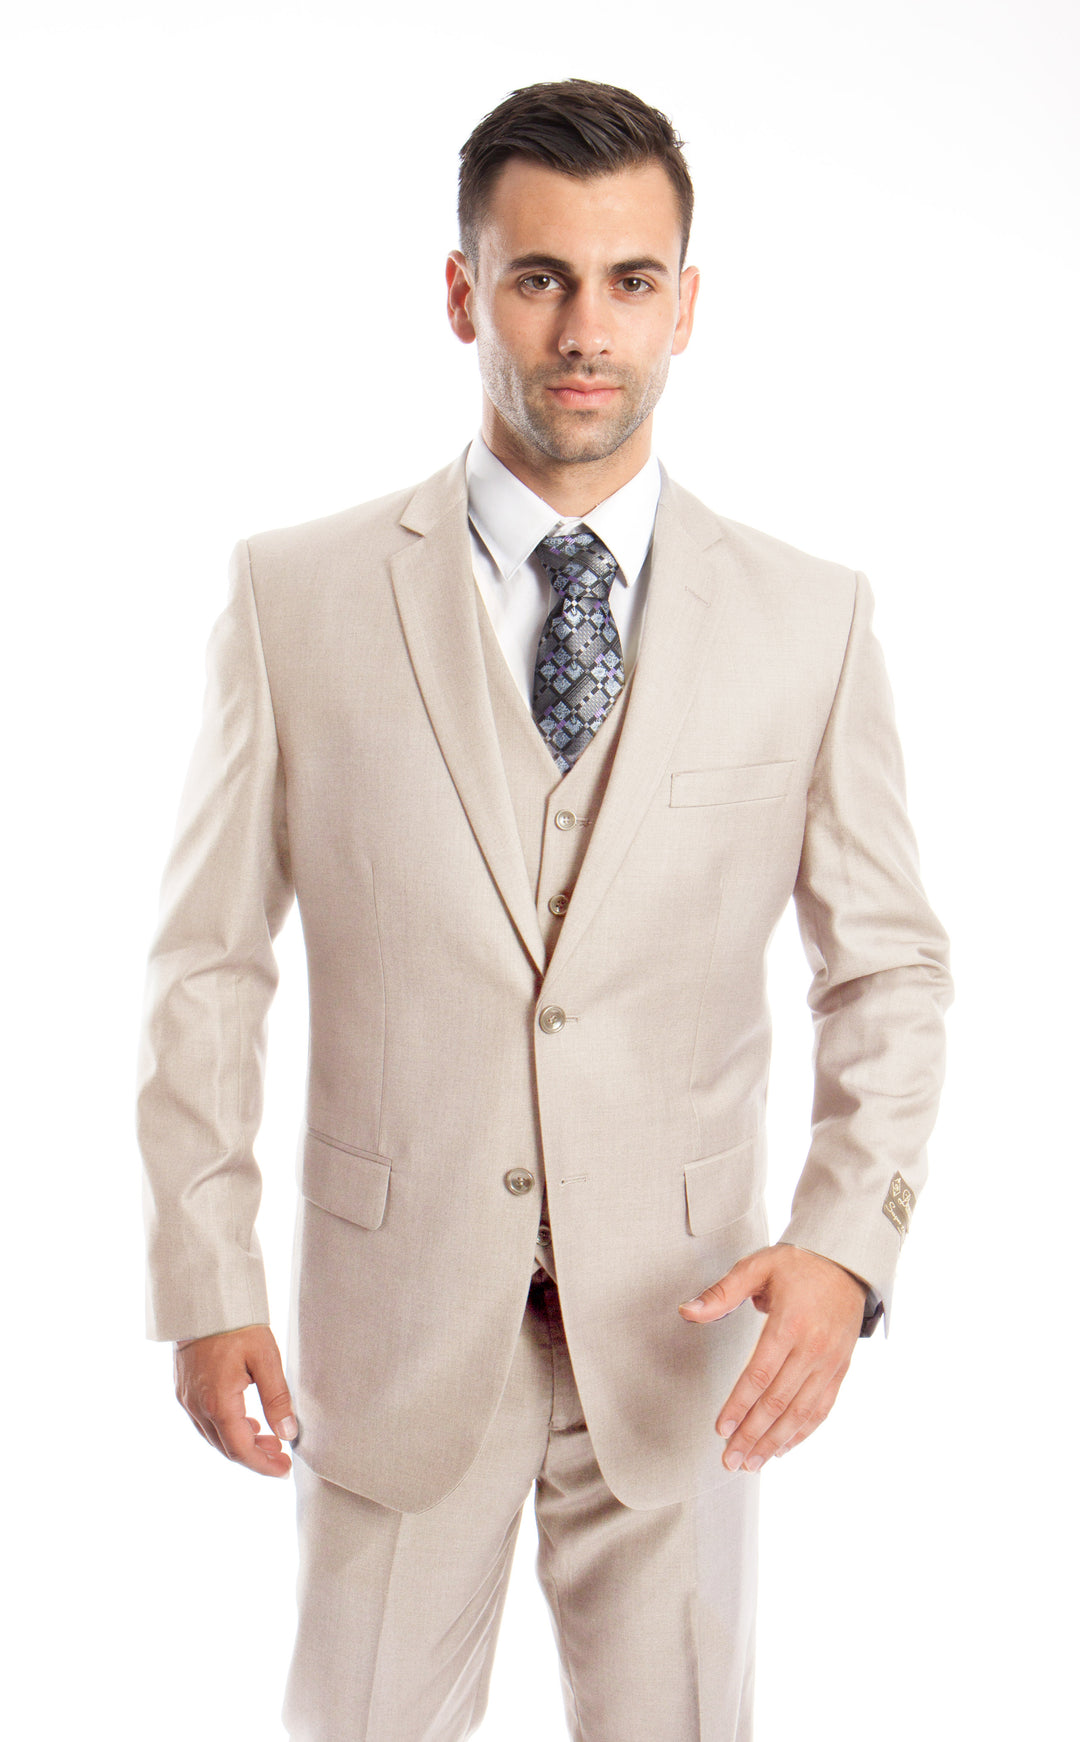 Tan Solid 3-PC Modern Fit Suits For Men - New York Man Suits